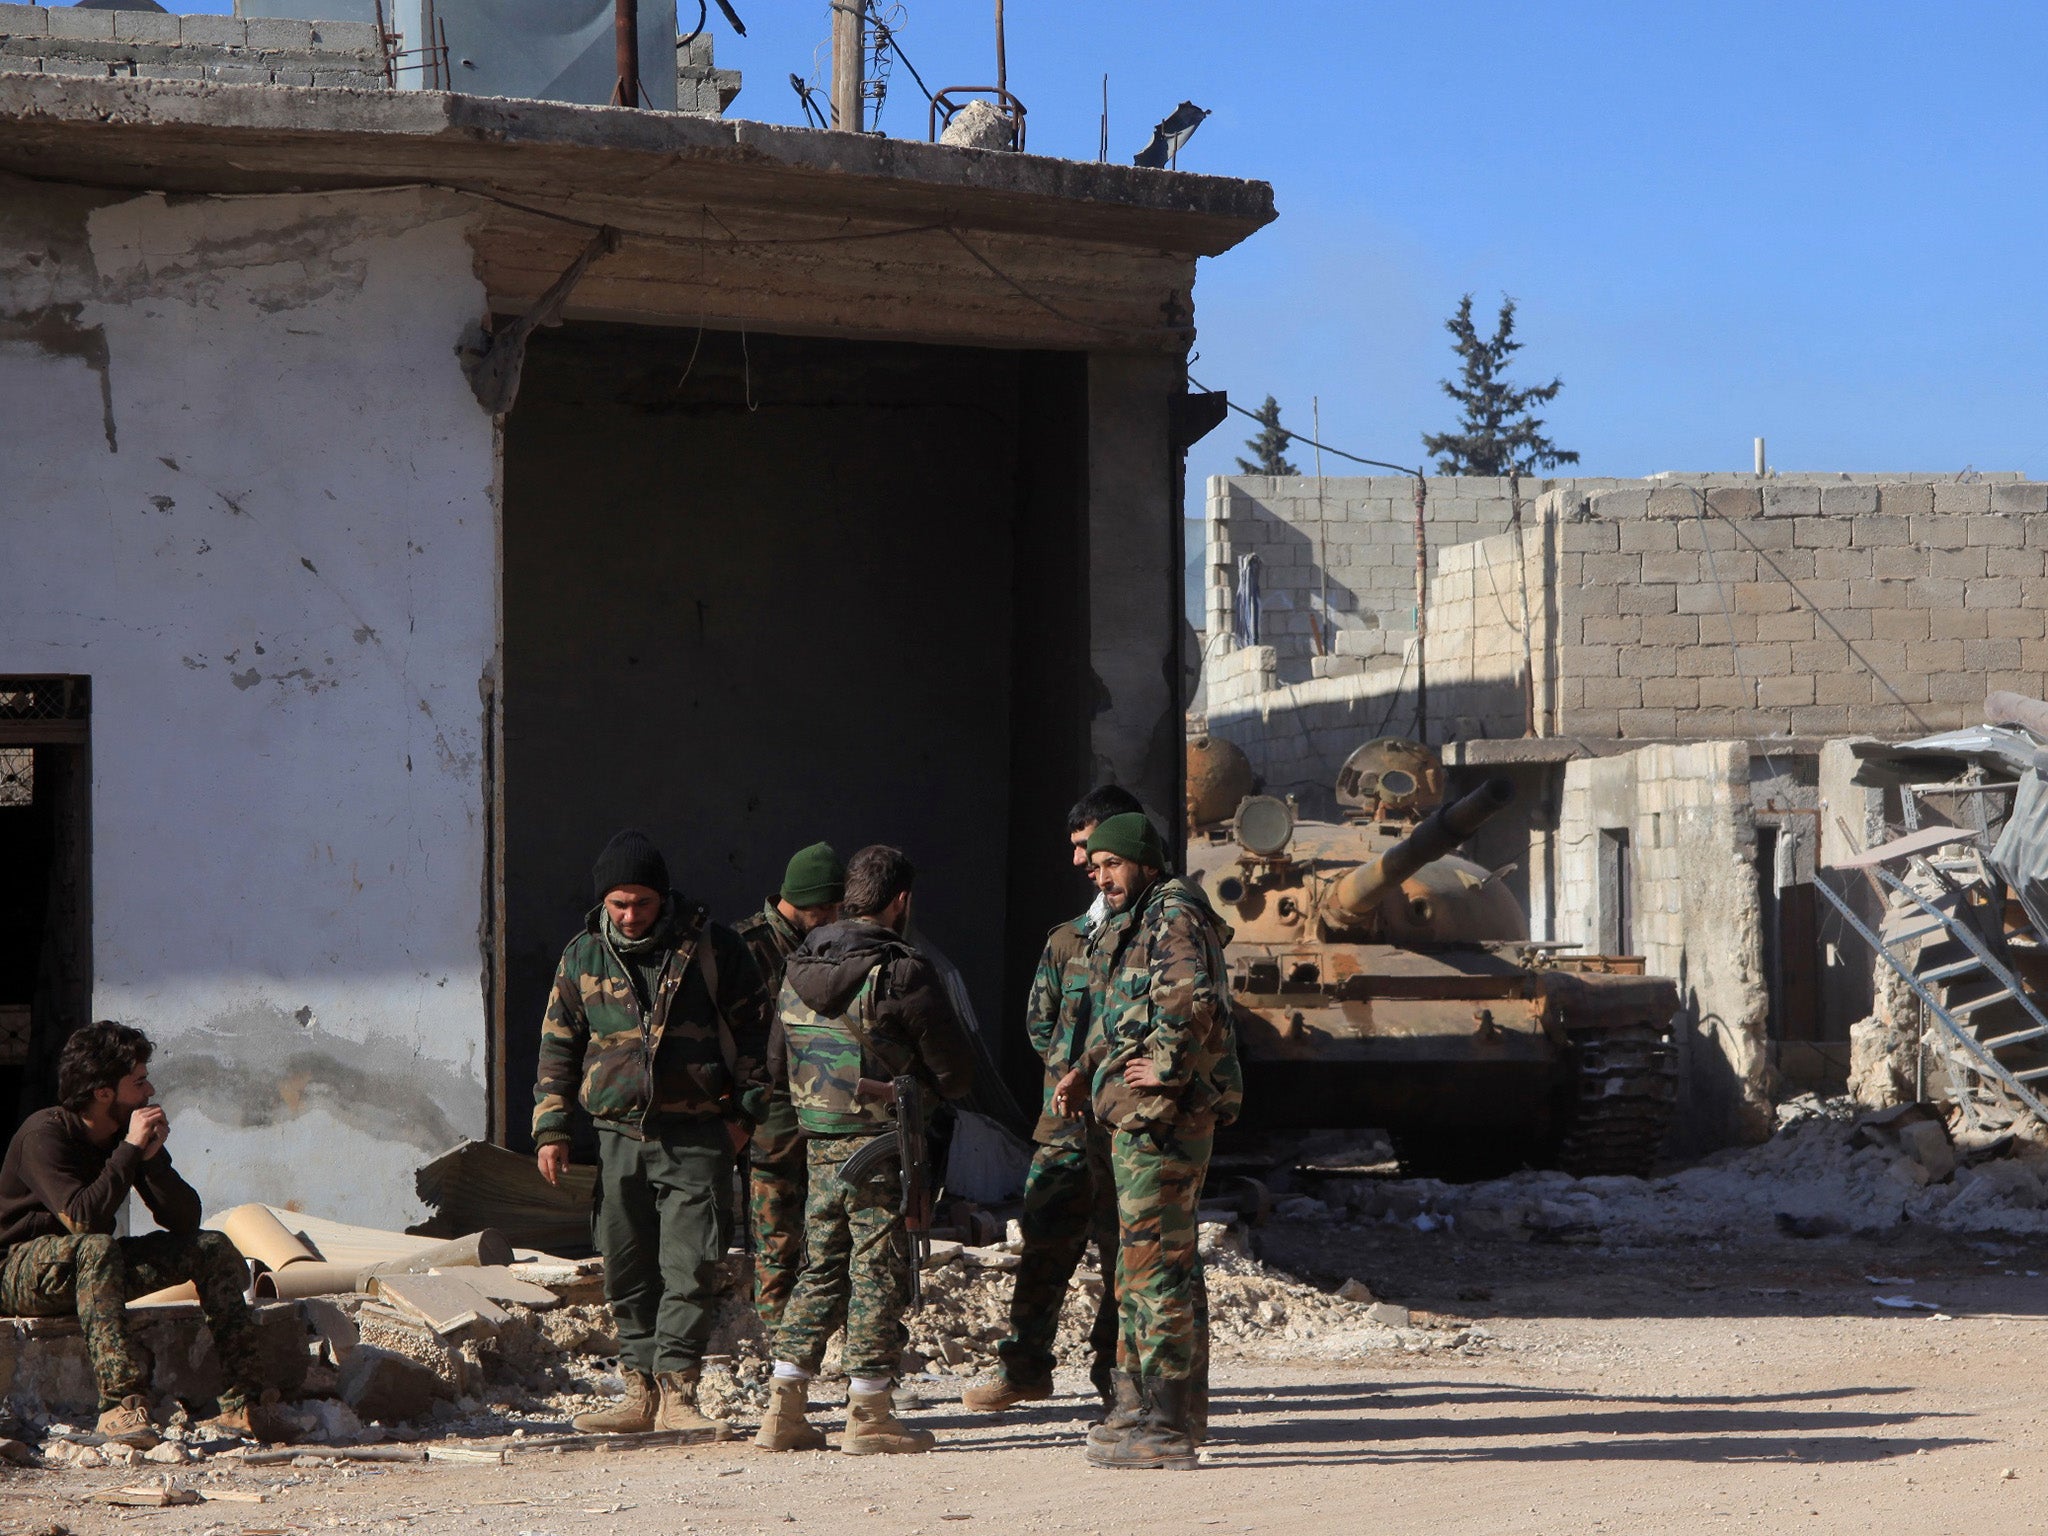 Pro-government soldiers in the town of Tal Jabin, north of Aleppo, ahead of the assault to recapture Nubul and Zahraa